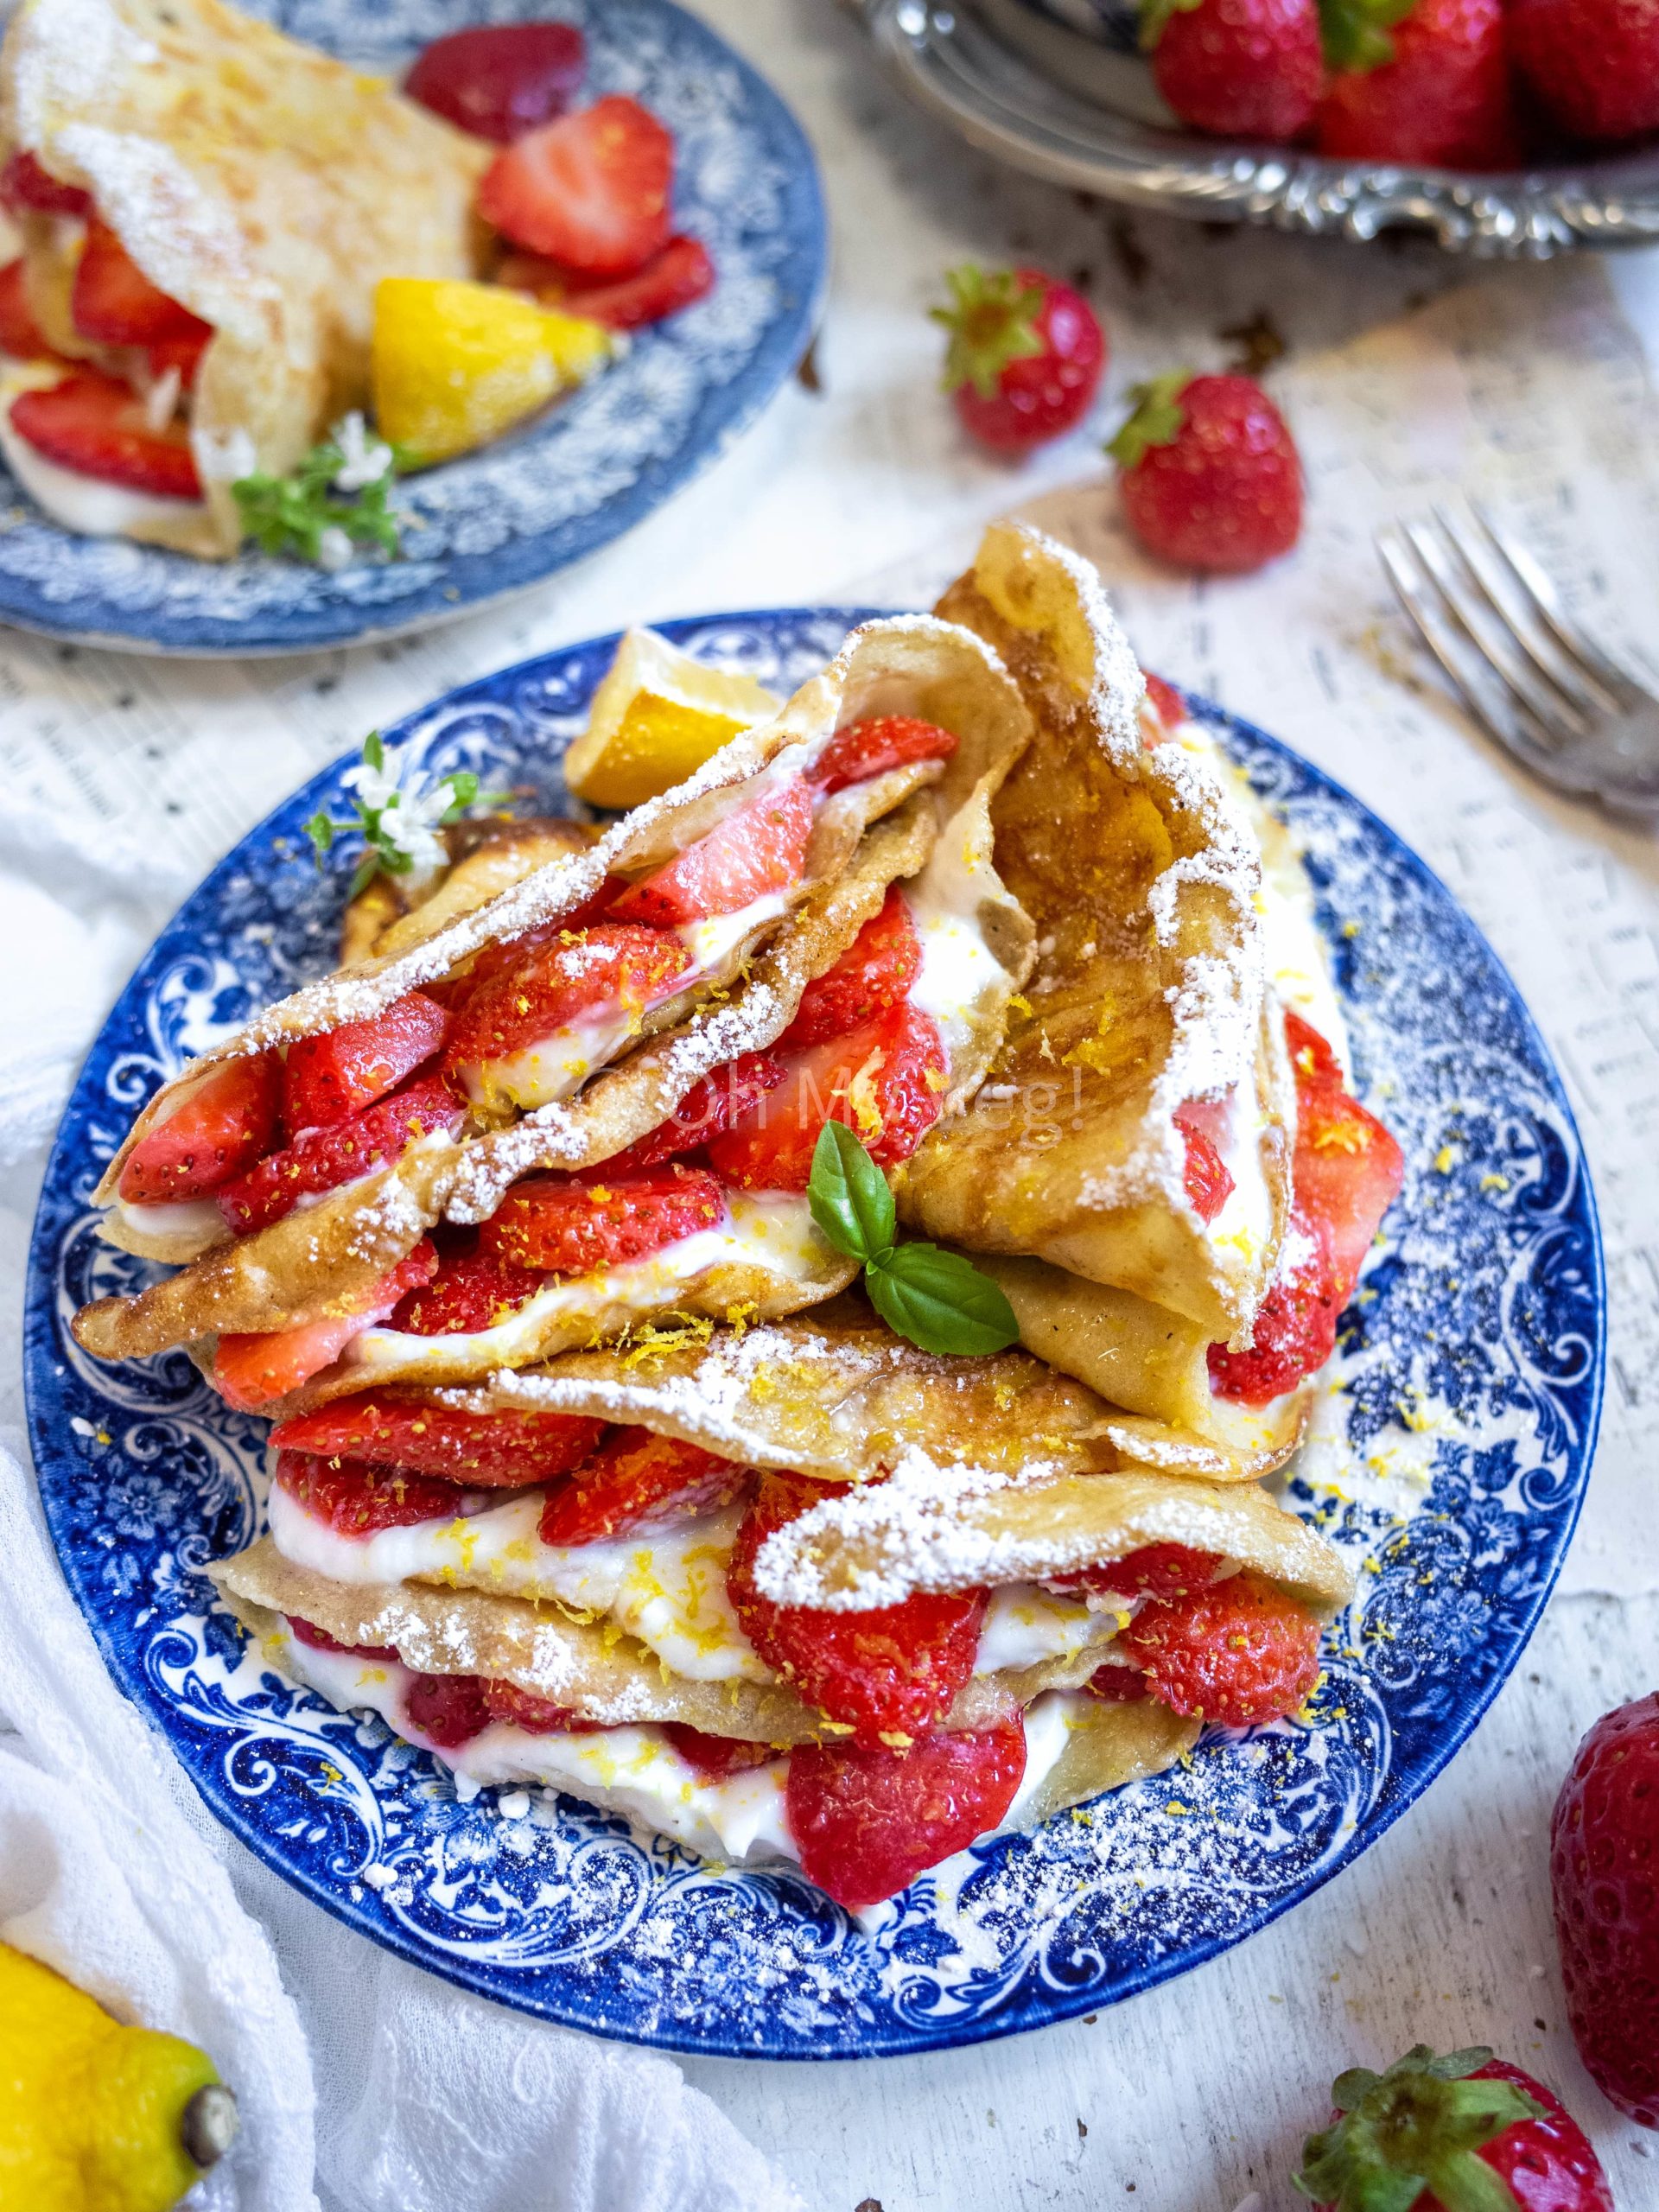 Folded crepes with whipped lemon ricotta cream and fresh strawberries on a blue plate